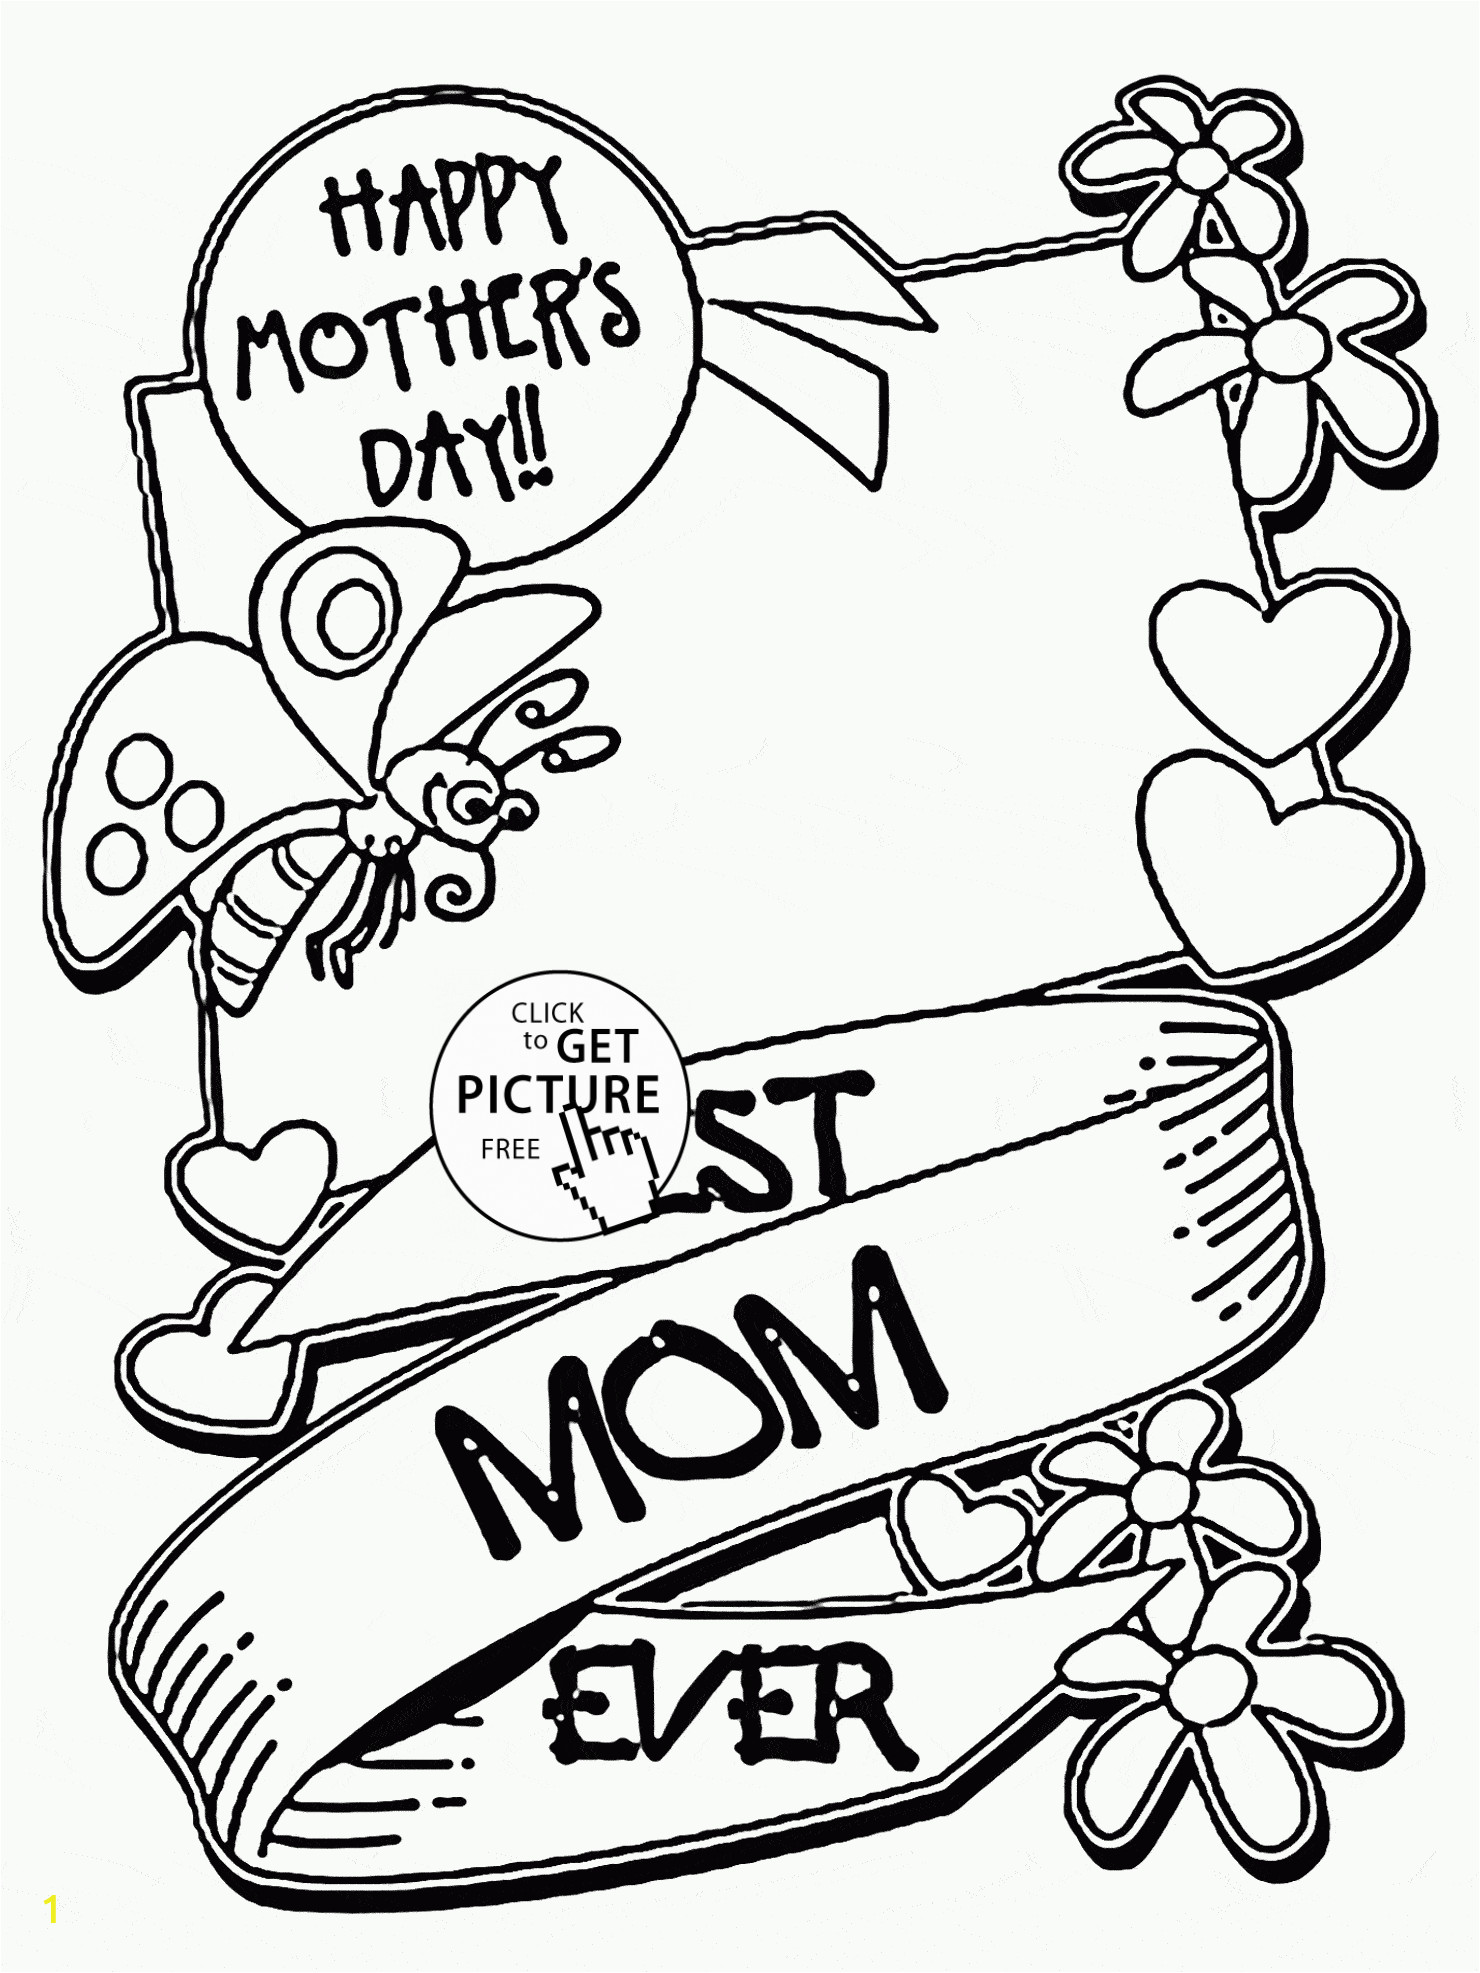 Veterans Day Coloring Pages Pdf Best Mom Ever Mother S Day Coloring Page for Kids